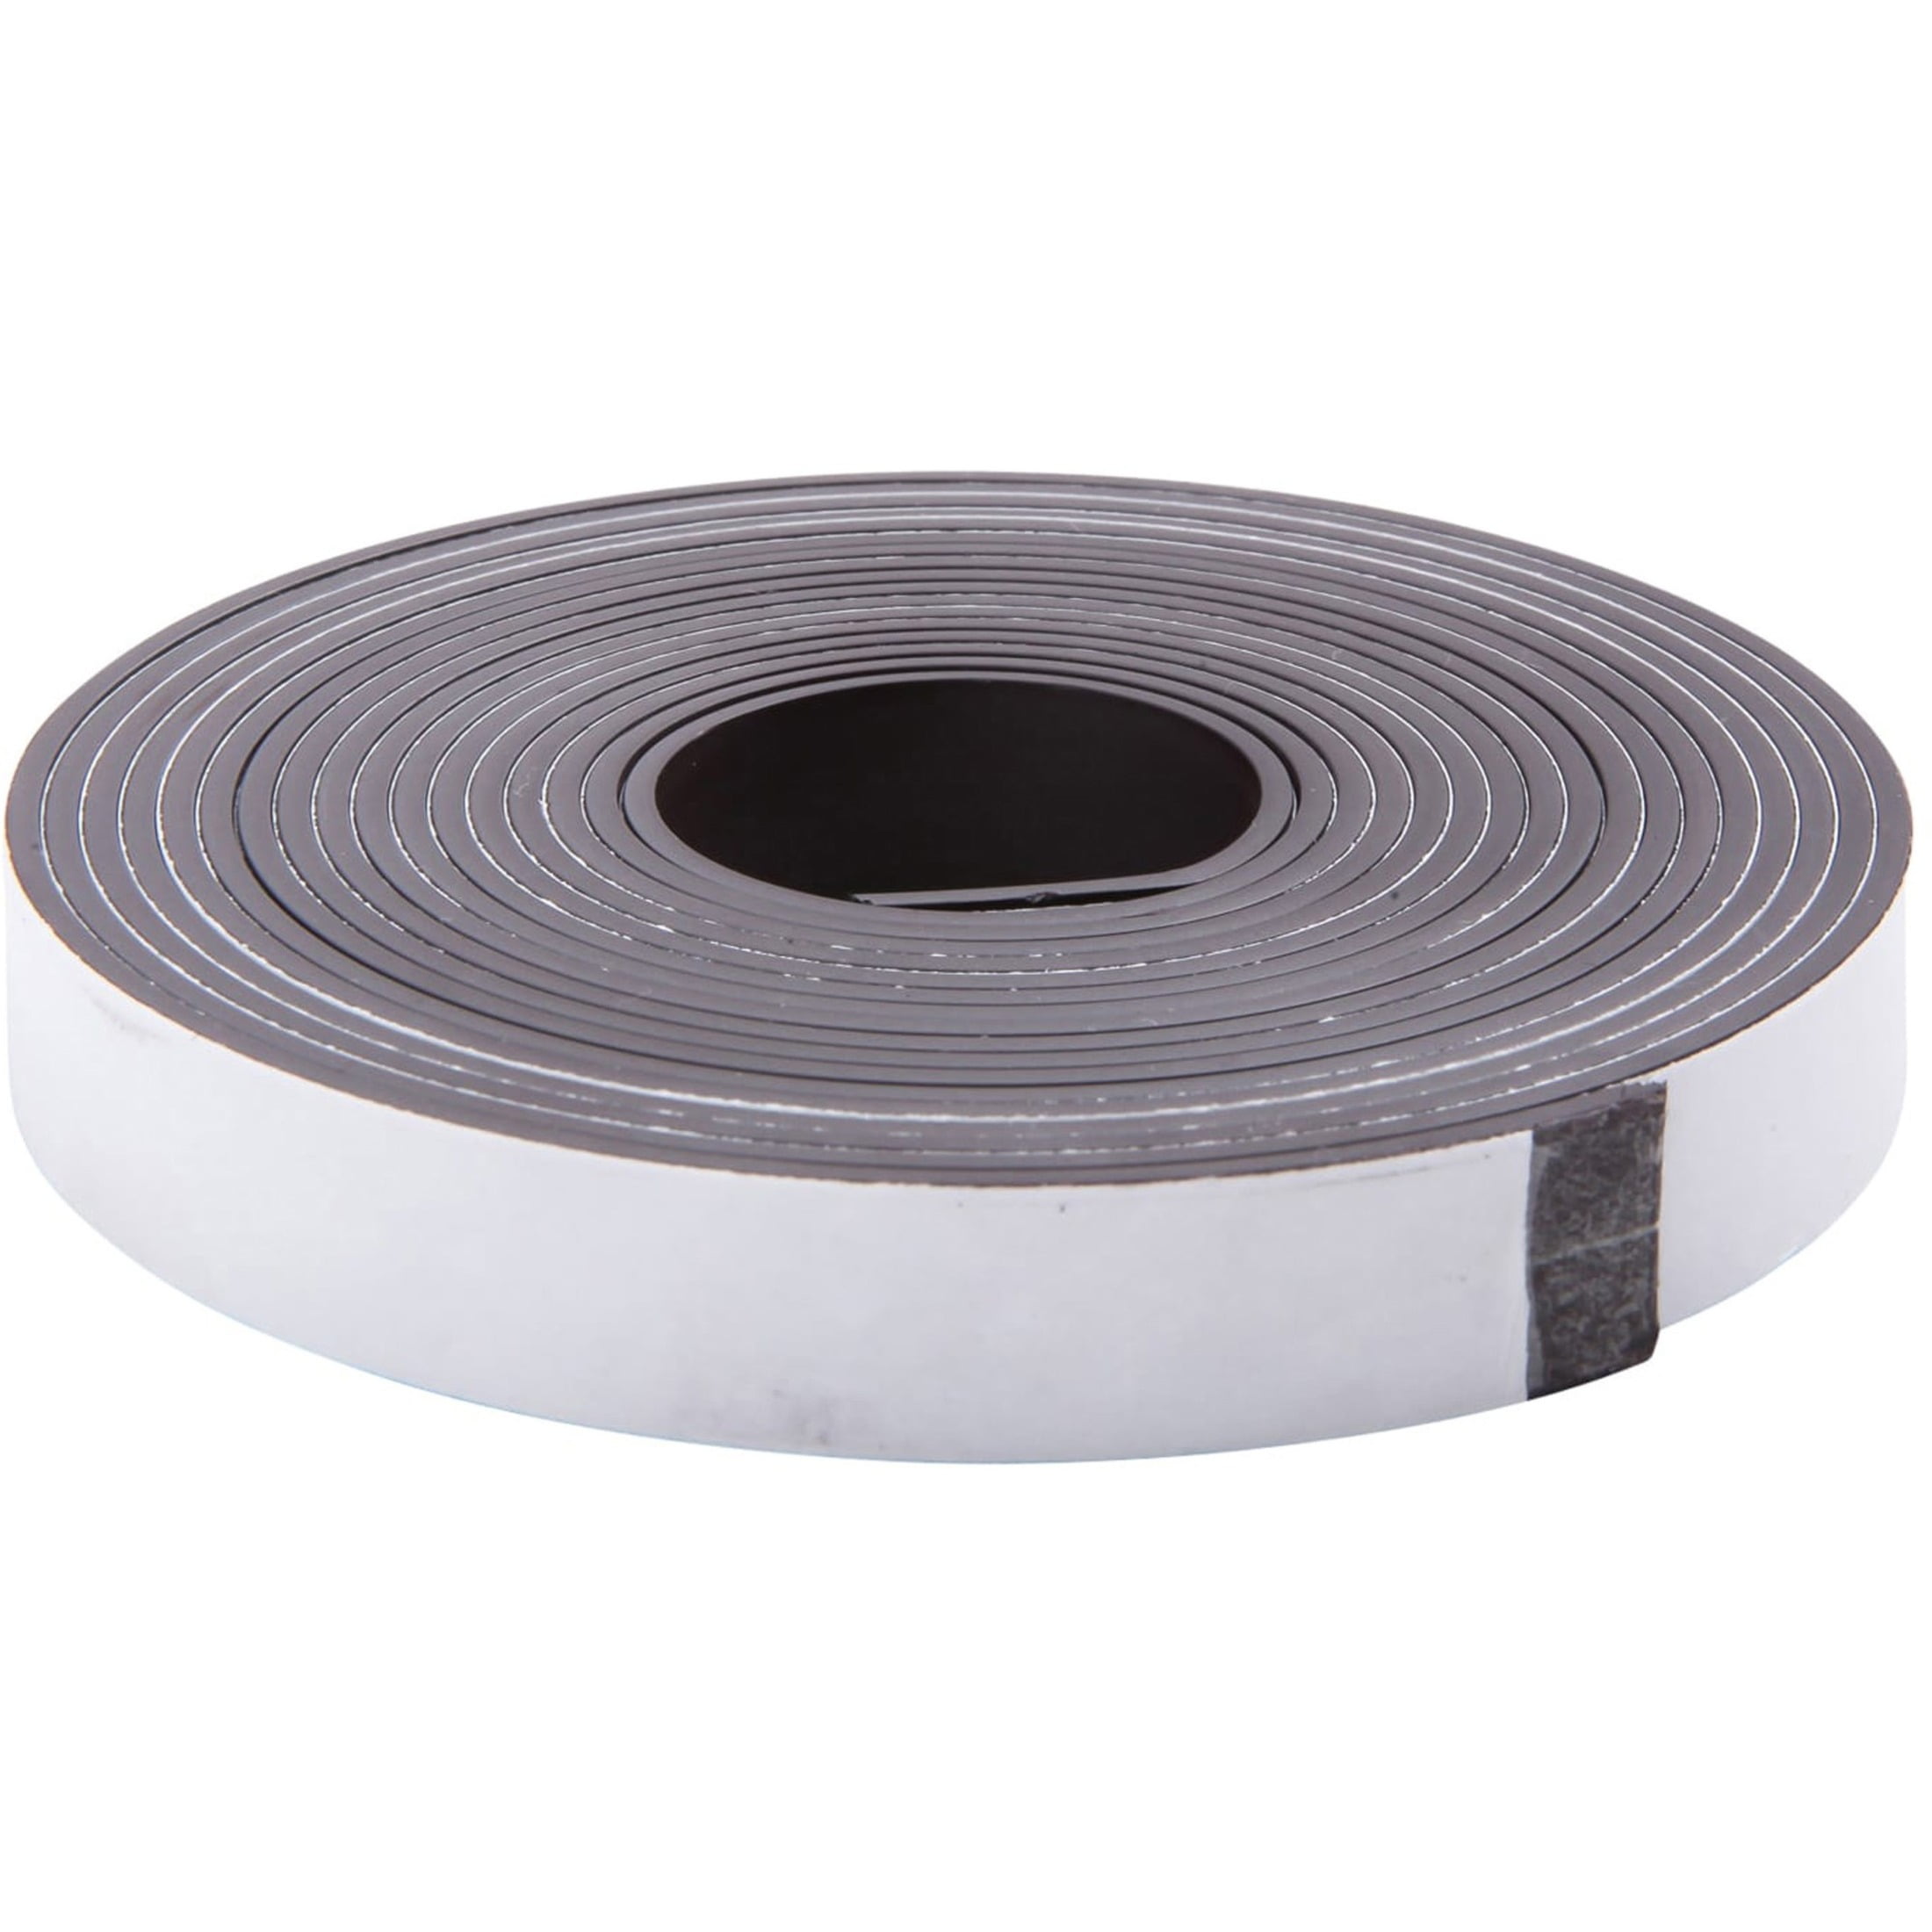 Magnetic Strip Tape Flexible Roll Adhesive Backed Magnet Strong Sticky Back  10Ft